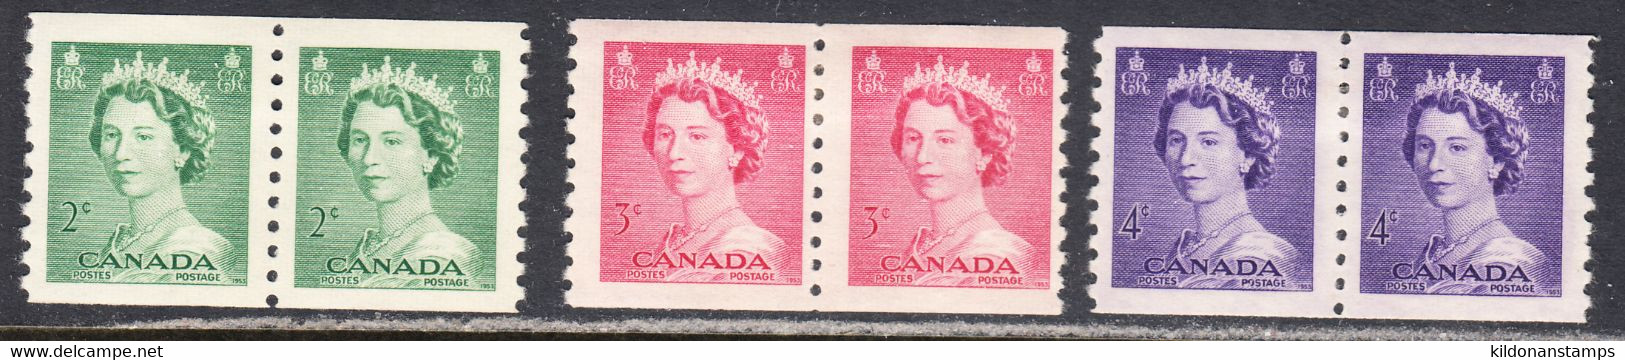 Canada 1953 Coils, Mint Mounted, Sc# 331-333, SG - Roulettes